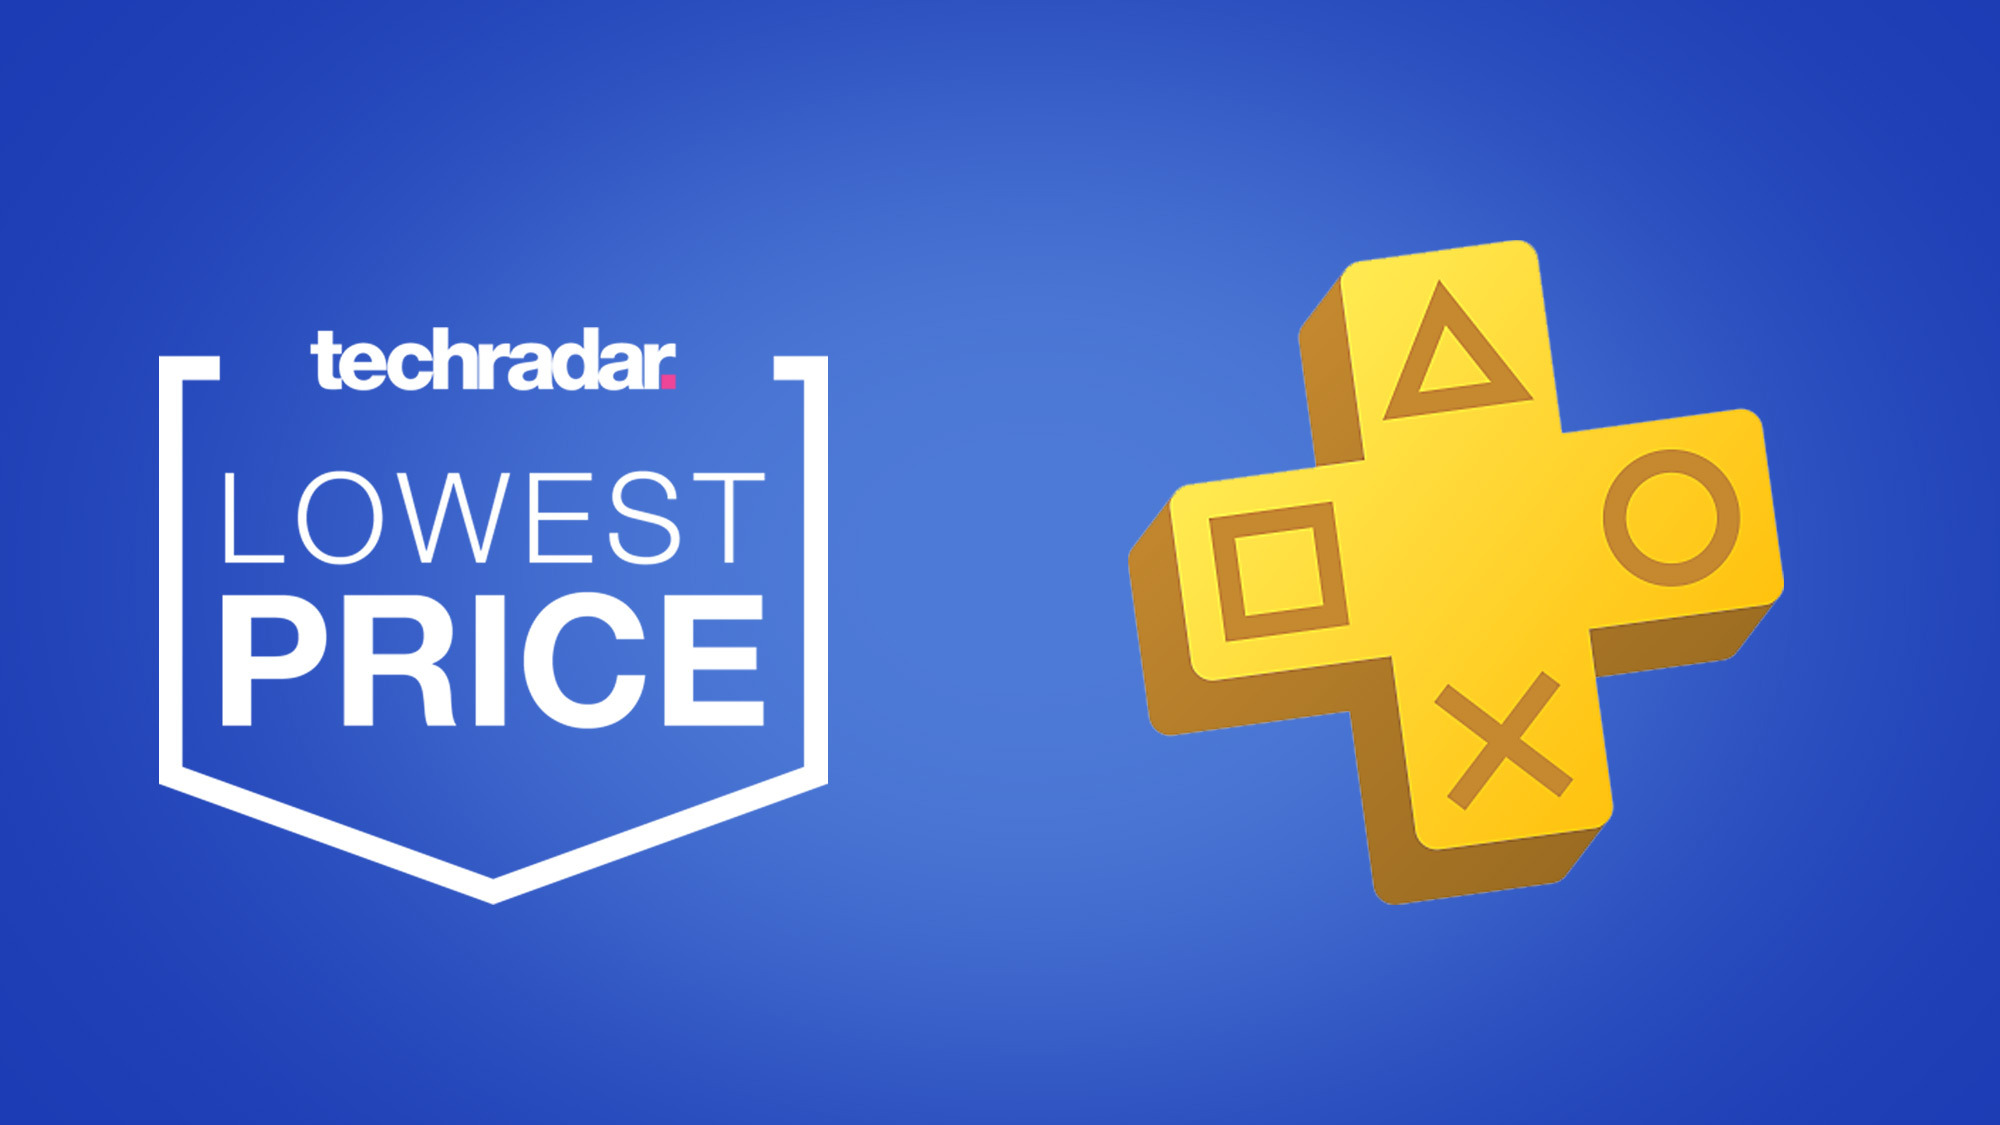 Buy PlayStation Plus Extra 3 Months - PSN Account - GLOBAL - Cheap